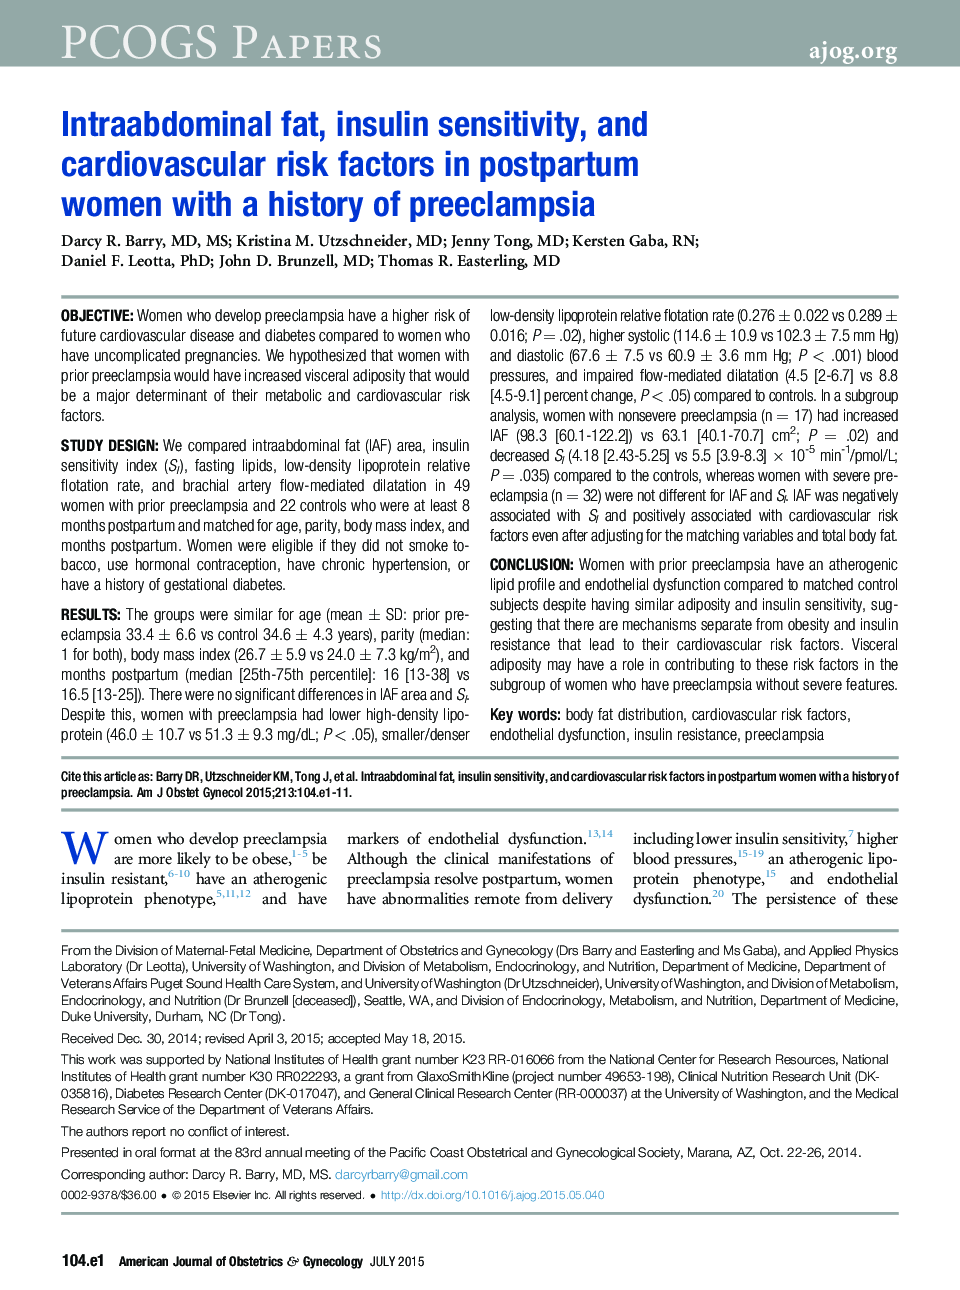 Intraabdominal fat, insulin sensitivity, and cardiovascular risk factors in postpartum women with a history of preeclampsia